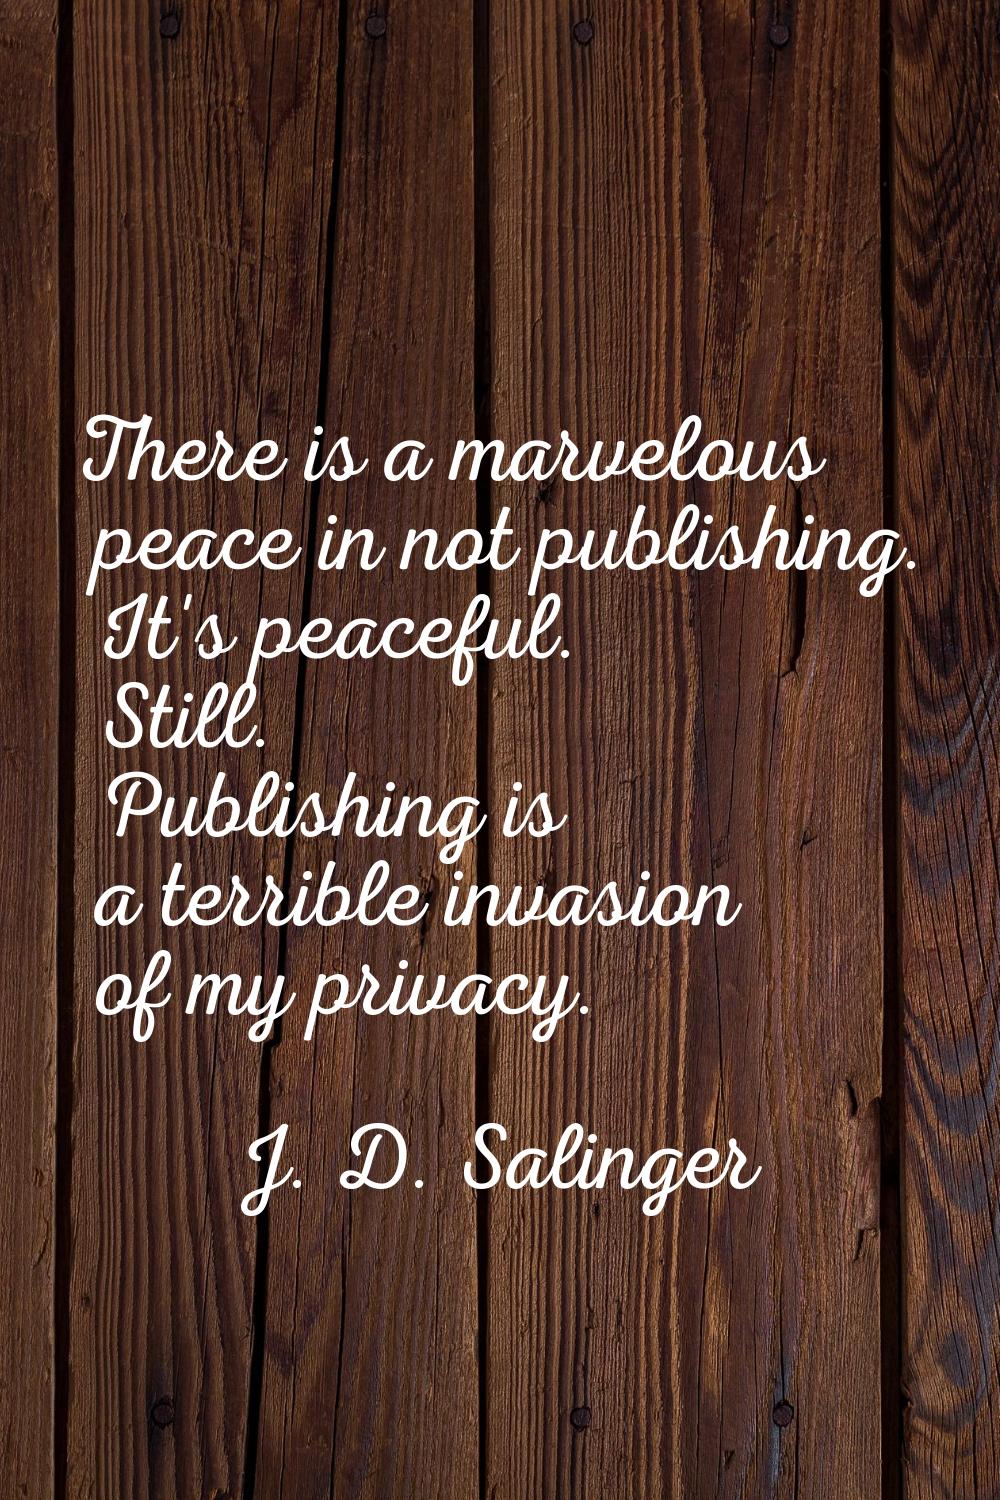 There is a marvelous peace in not publishing. It's peaceful. Still. Publishing is a terrible invasi